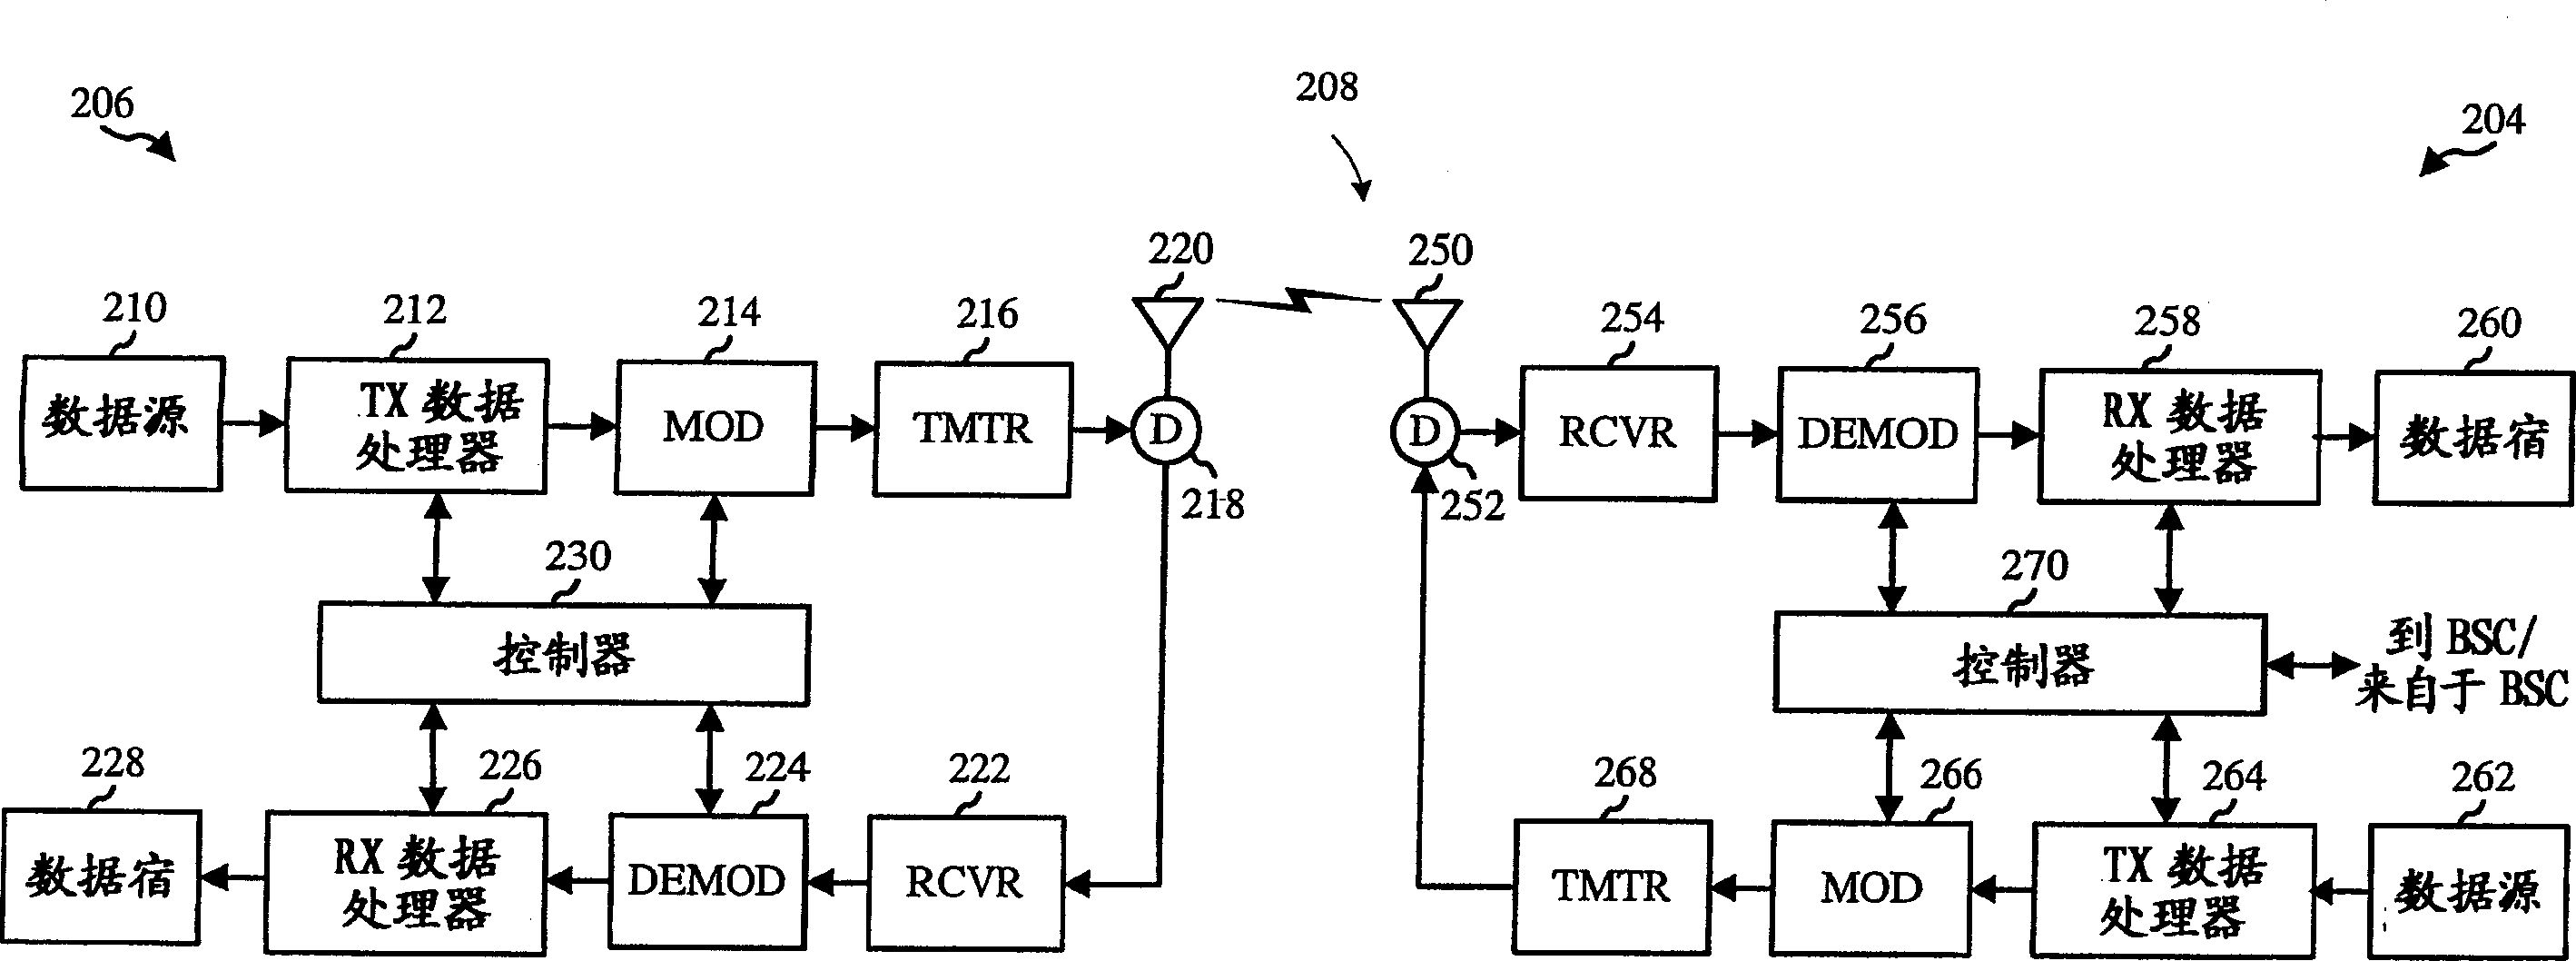 Method and apparatus for supporting group communications based on location vector